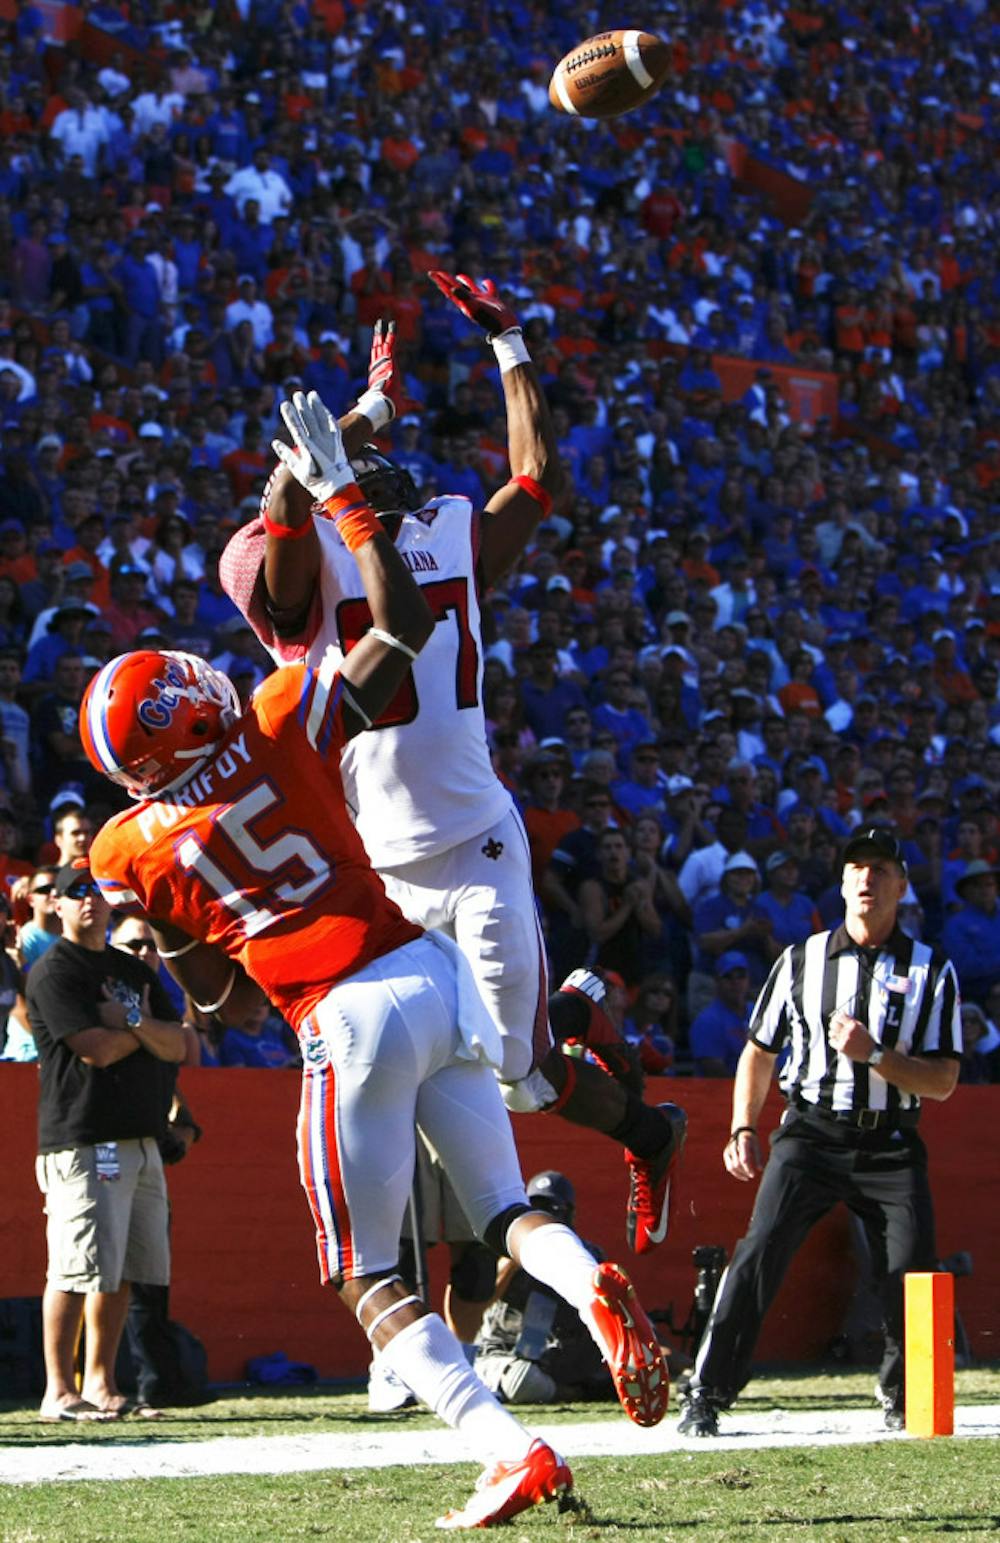 <p>Defensive back Loucheiz Purifoy blocks a pass on Saturday at Ben Hill Griffin Stadium. His block punt led to a Jelani Jenkins recovery for a touchdown. Florida Beat Louisiana 27-20. </p>